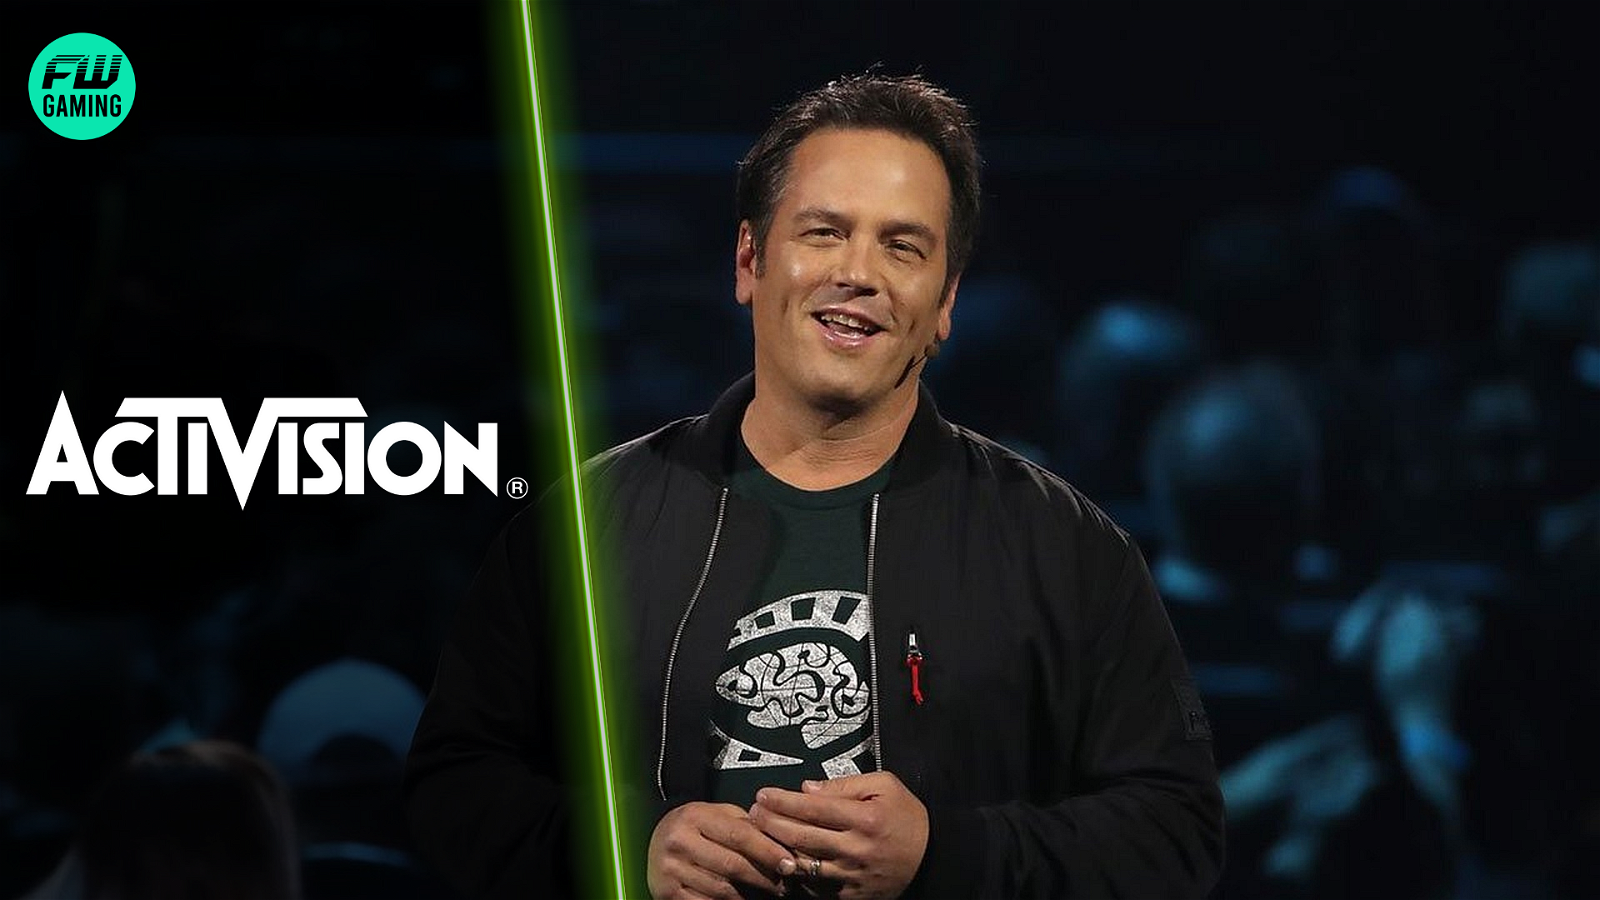 Phil Spencer Gives More Details on Future of Activision After Merger